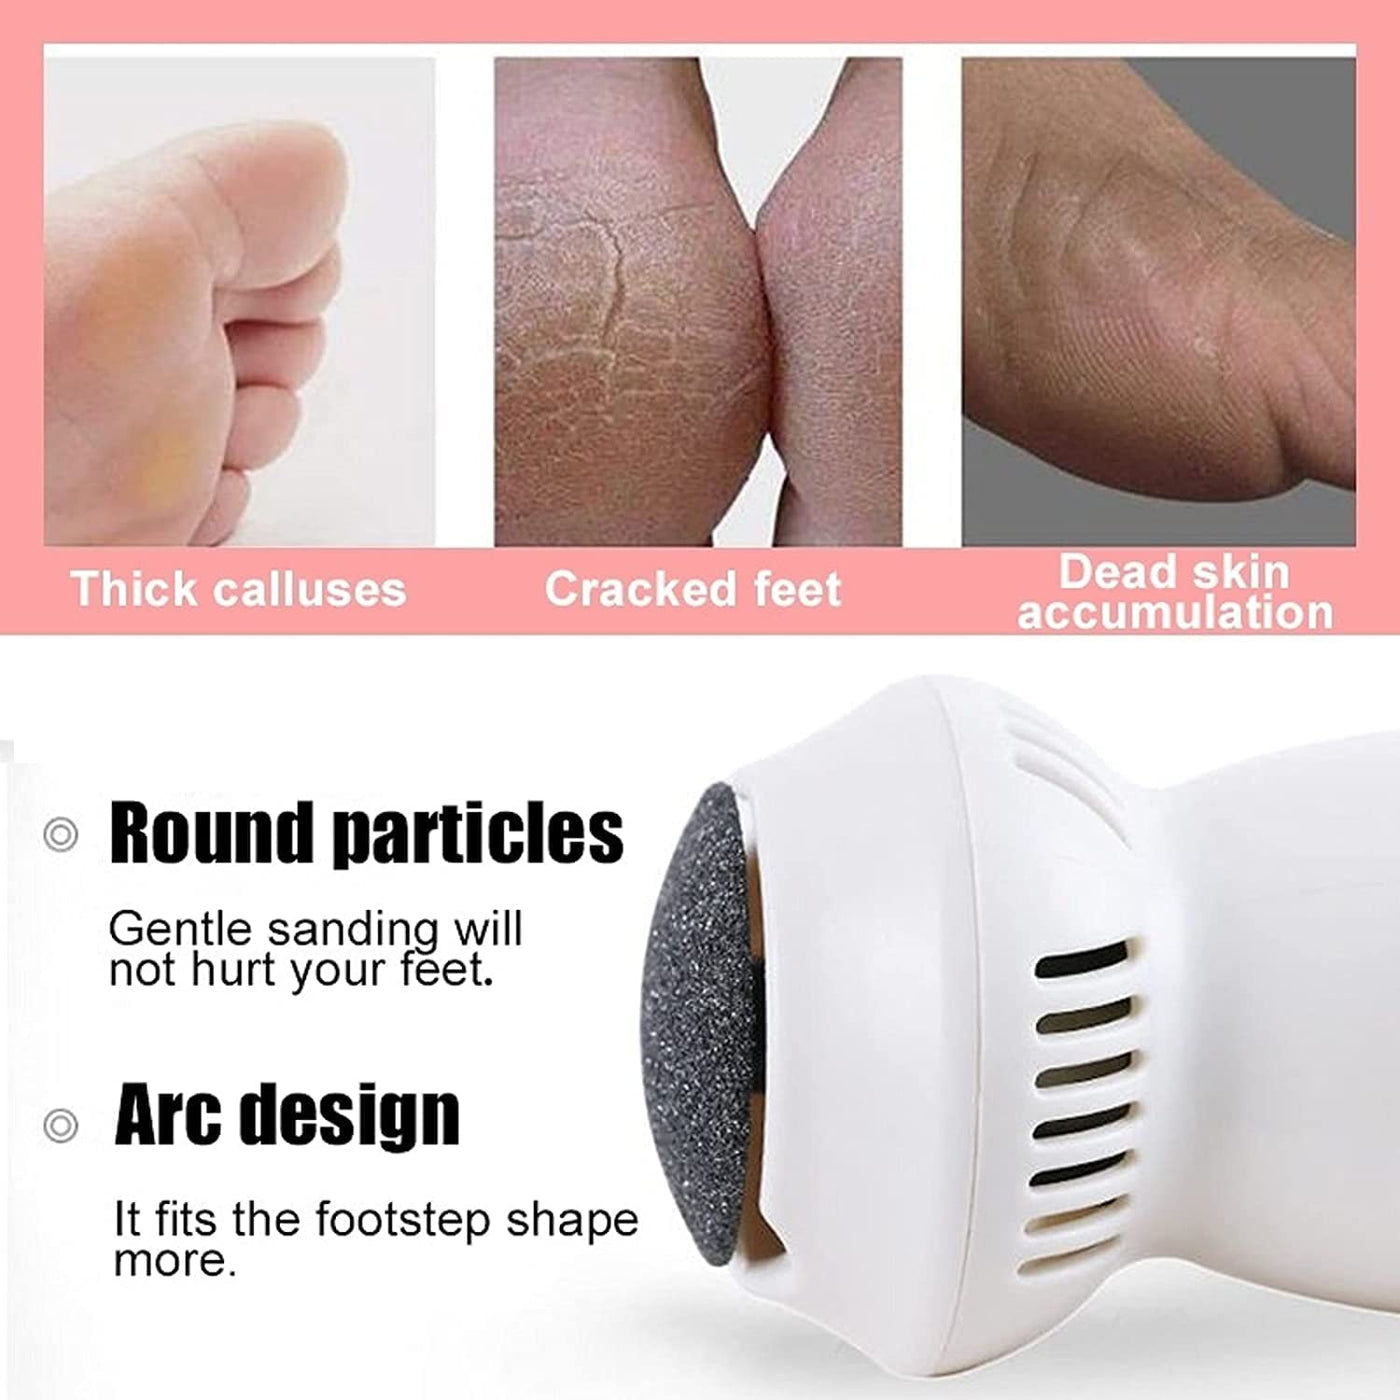 Electric Foot Grinder | Electric Foot File Grinder Dead Skin Callus Remover Foot Pedicure Tools Feet Care Hard Cracked Foot Files Clean Tools